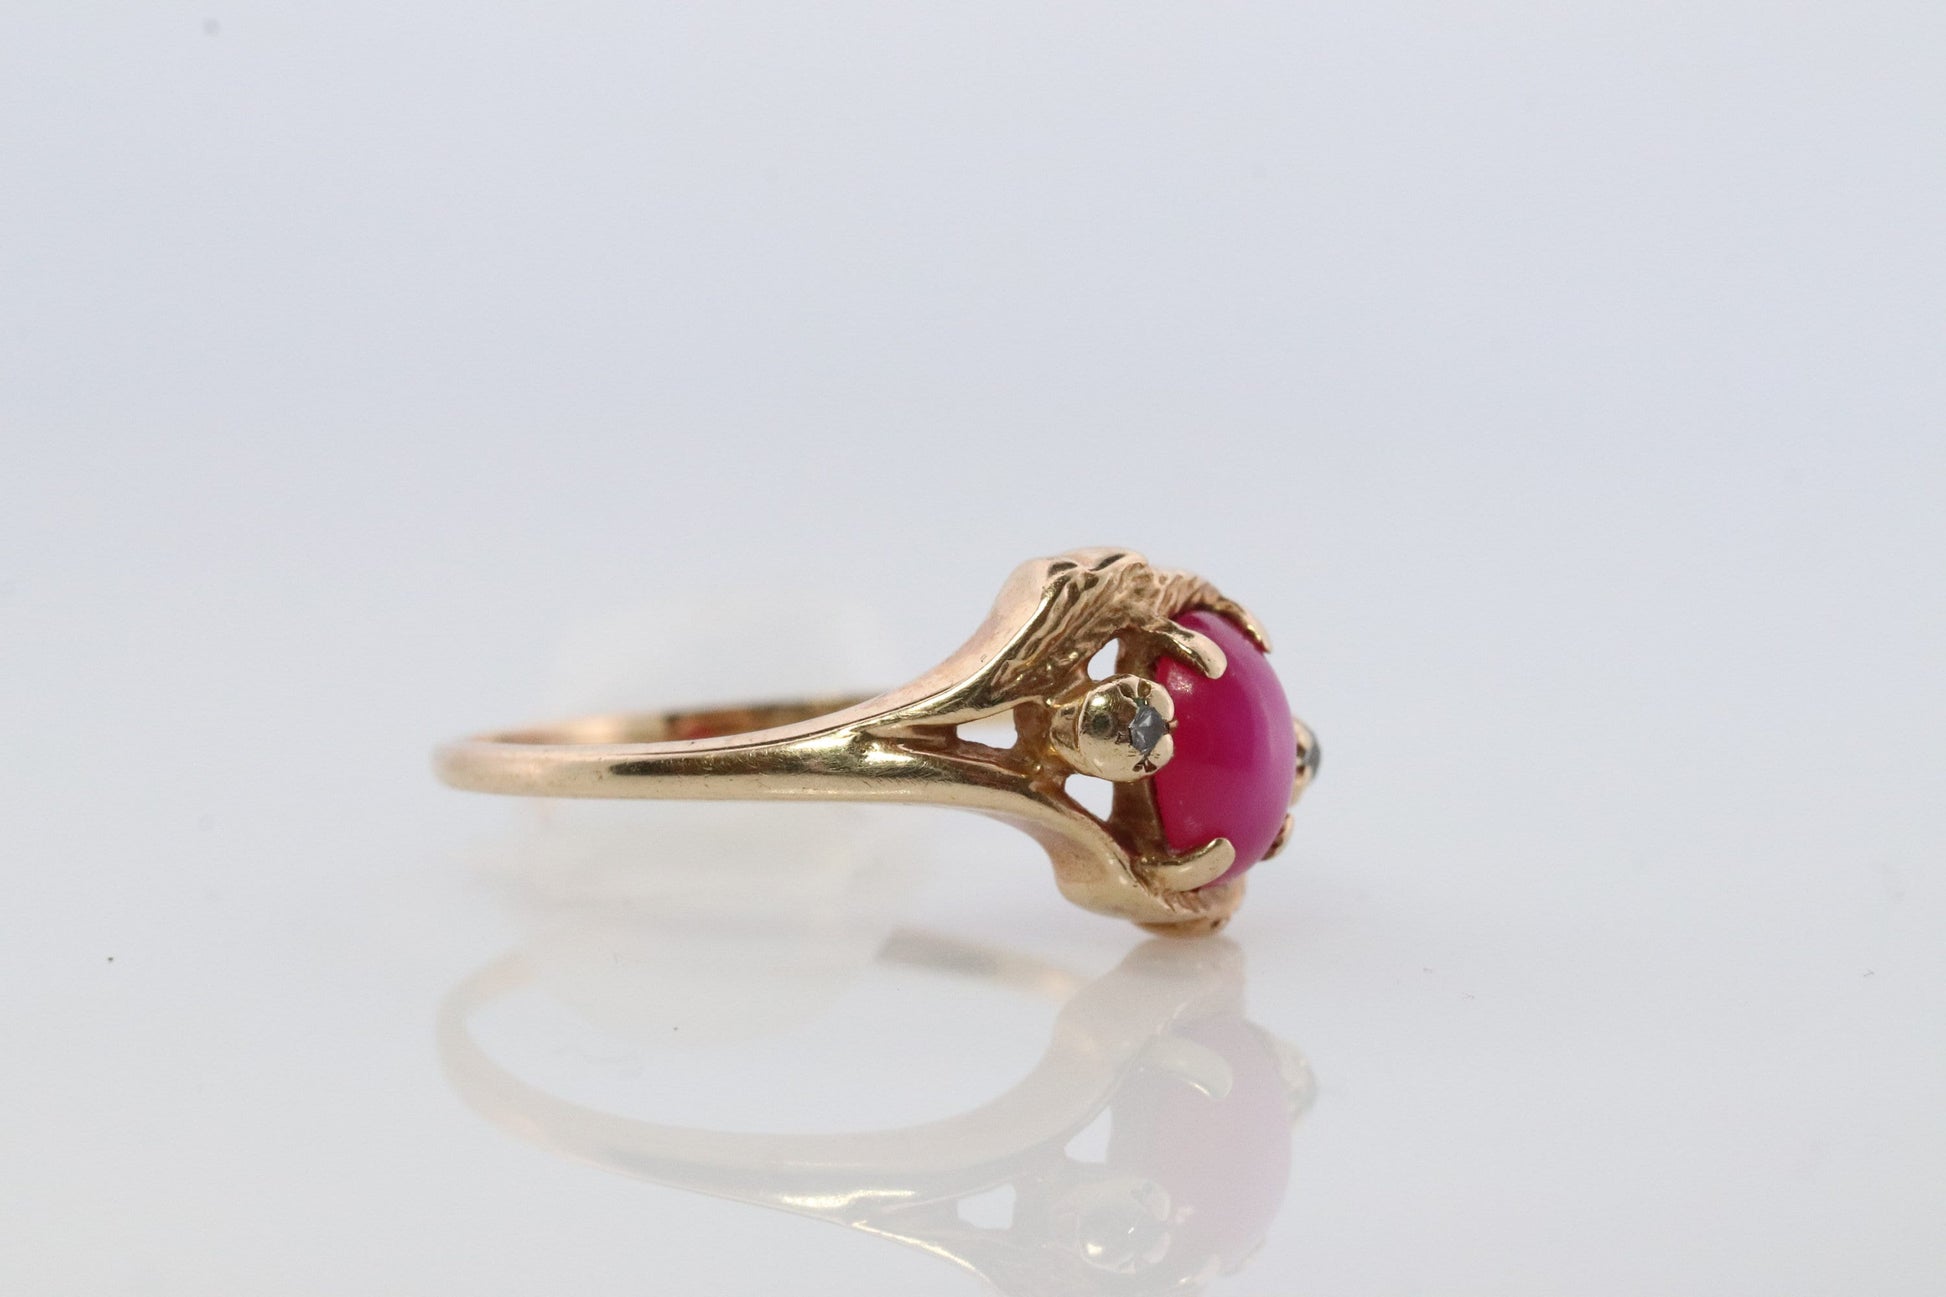 RED PINK STAR Ruby Solitaire ring. 10k Yellow gold. Star Sapphire with diamond accents.